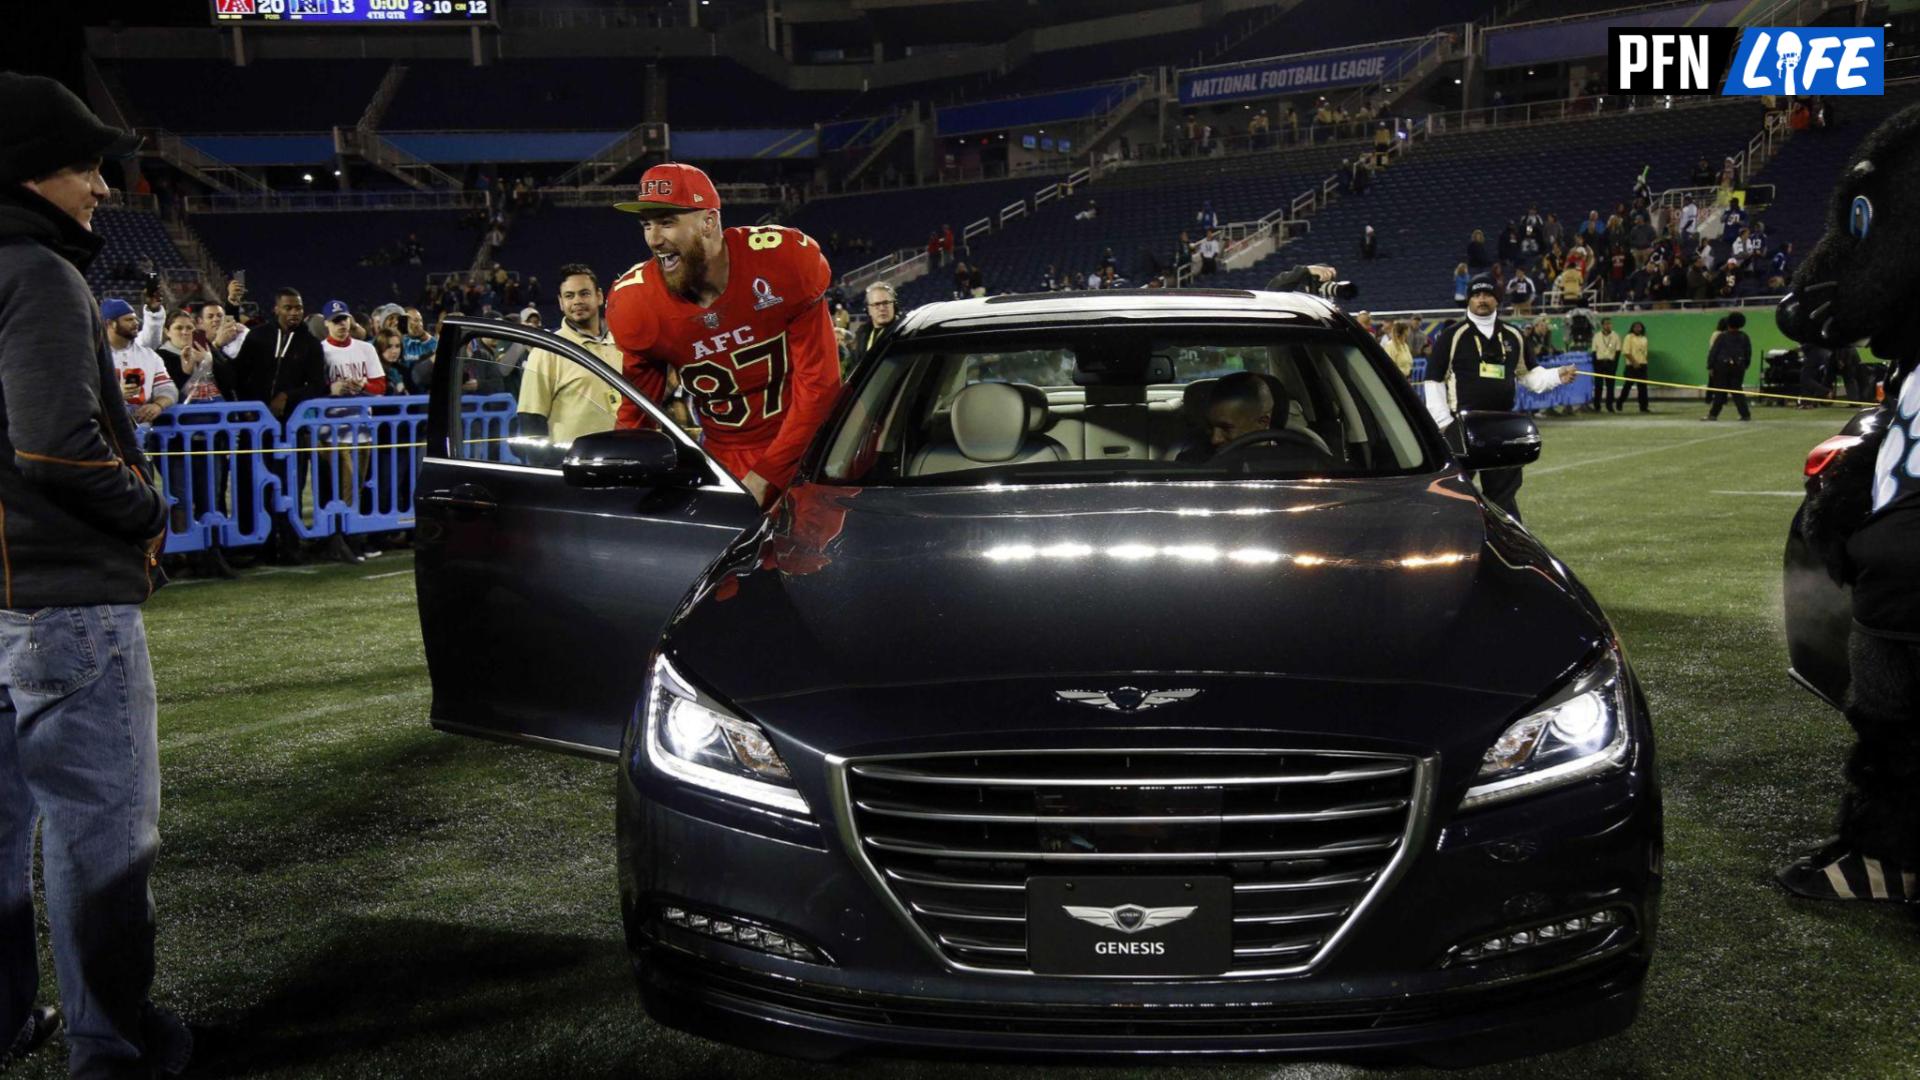 Offensive MVP, AFC tight end Travis Kelce of the Kansas city Chiefs (87) gets into the car he won after they beat the NFC at Citrus Bowl.AFC defeated the NFC 20-13.